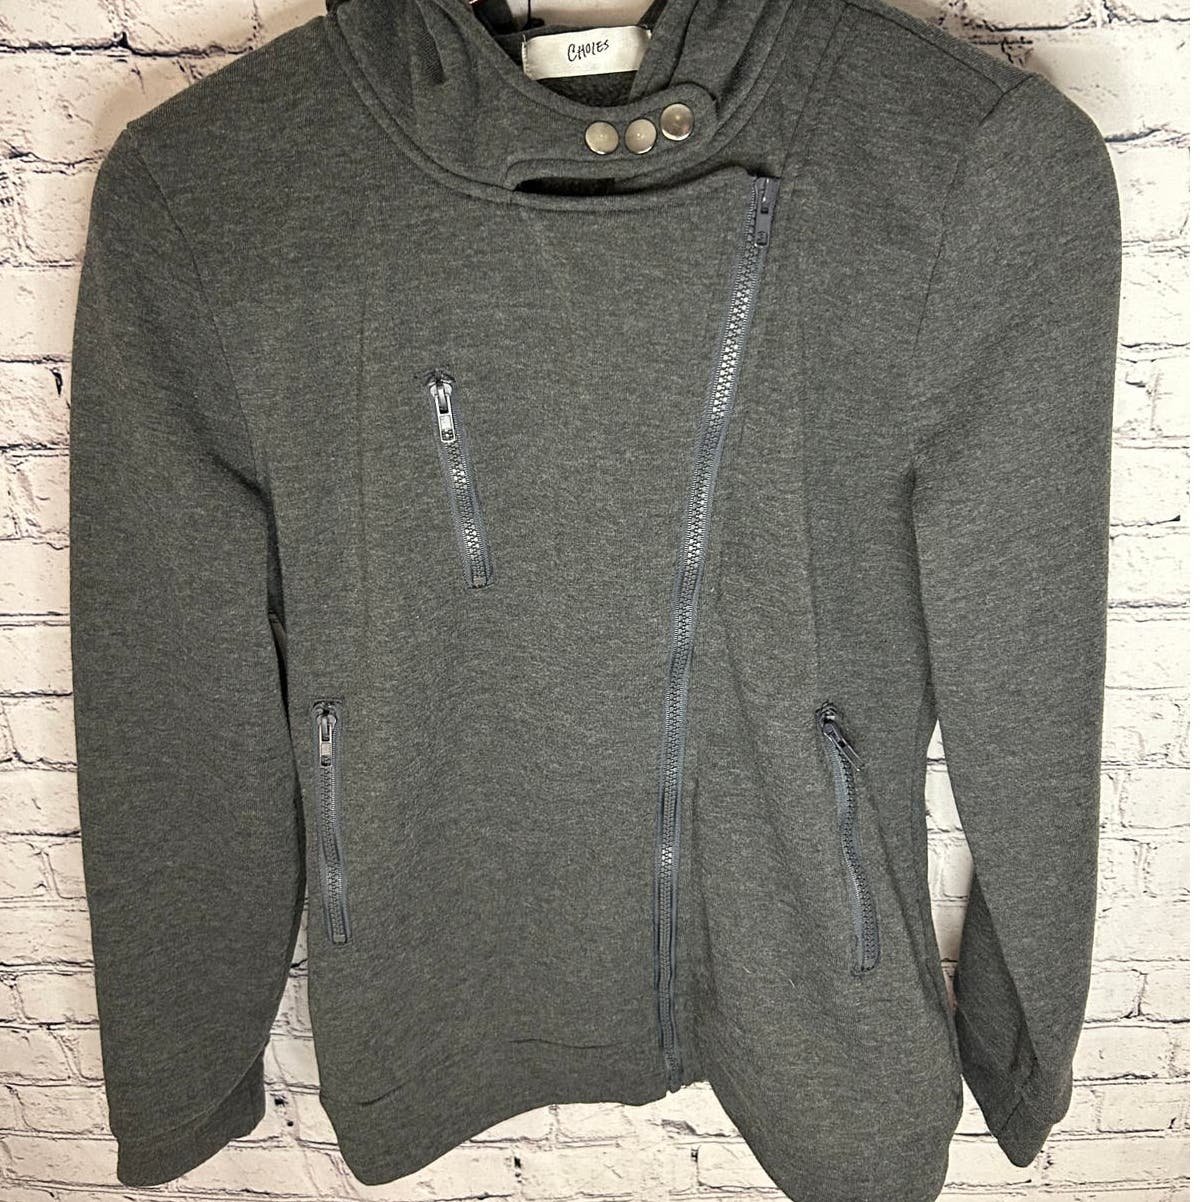 Women´s Choles Zip-up Hoodie size Large 5OFsxKE0o